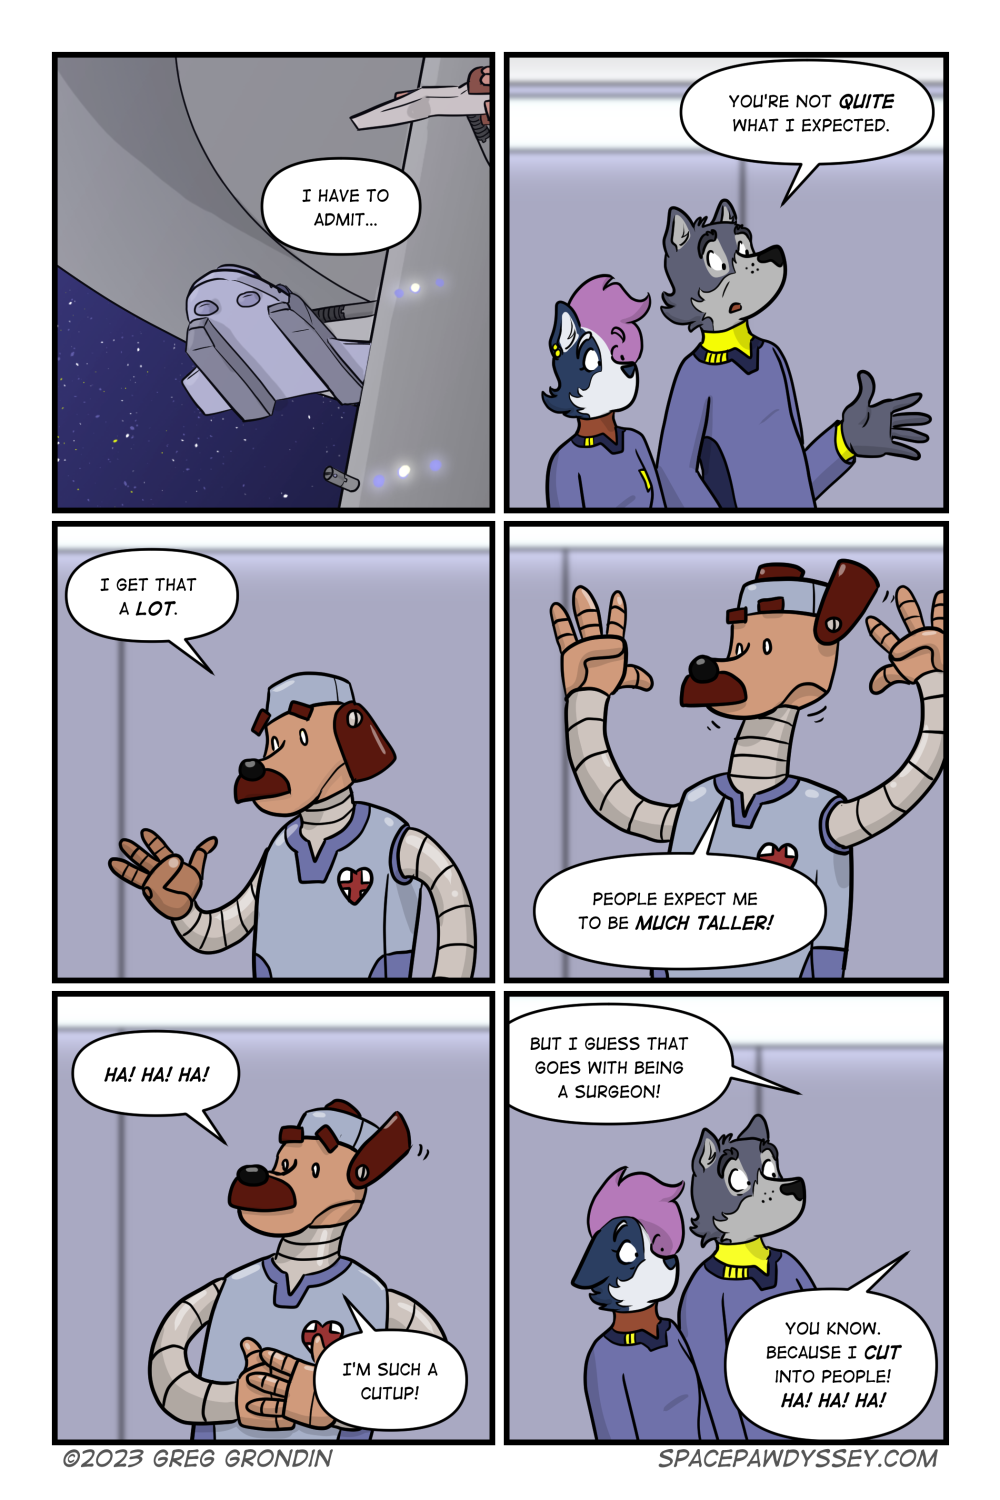 Space Pawdyssey #655